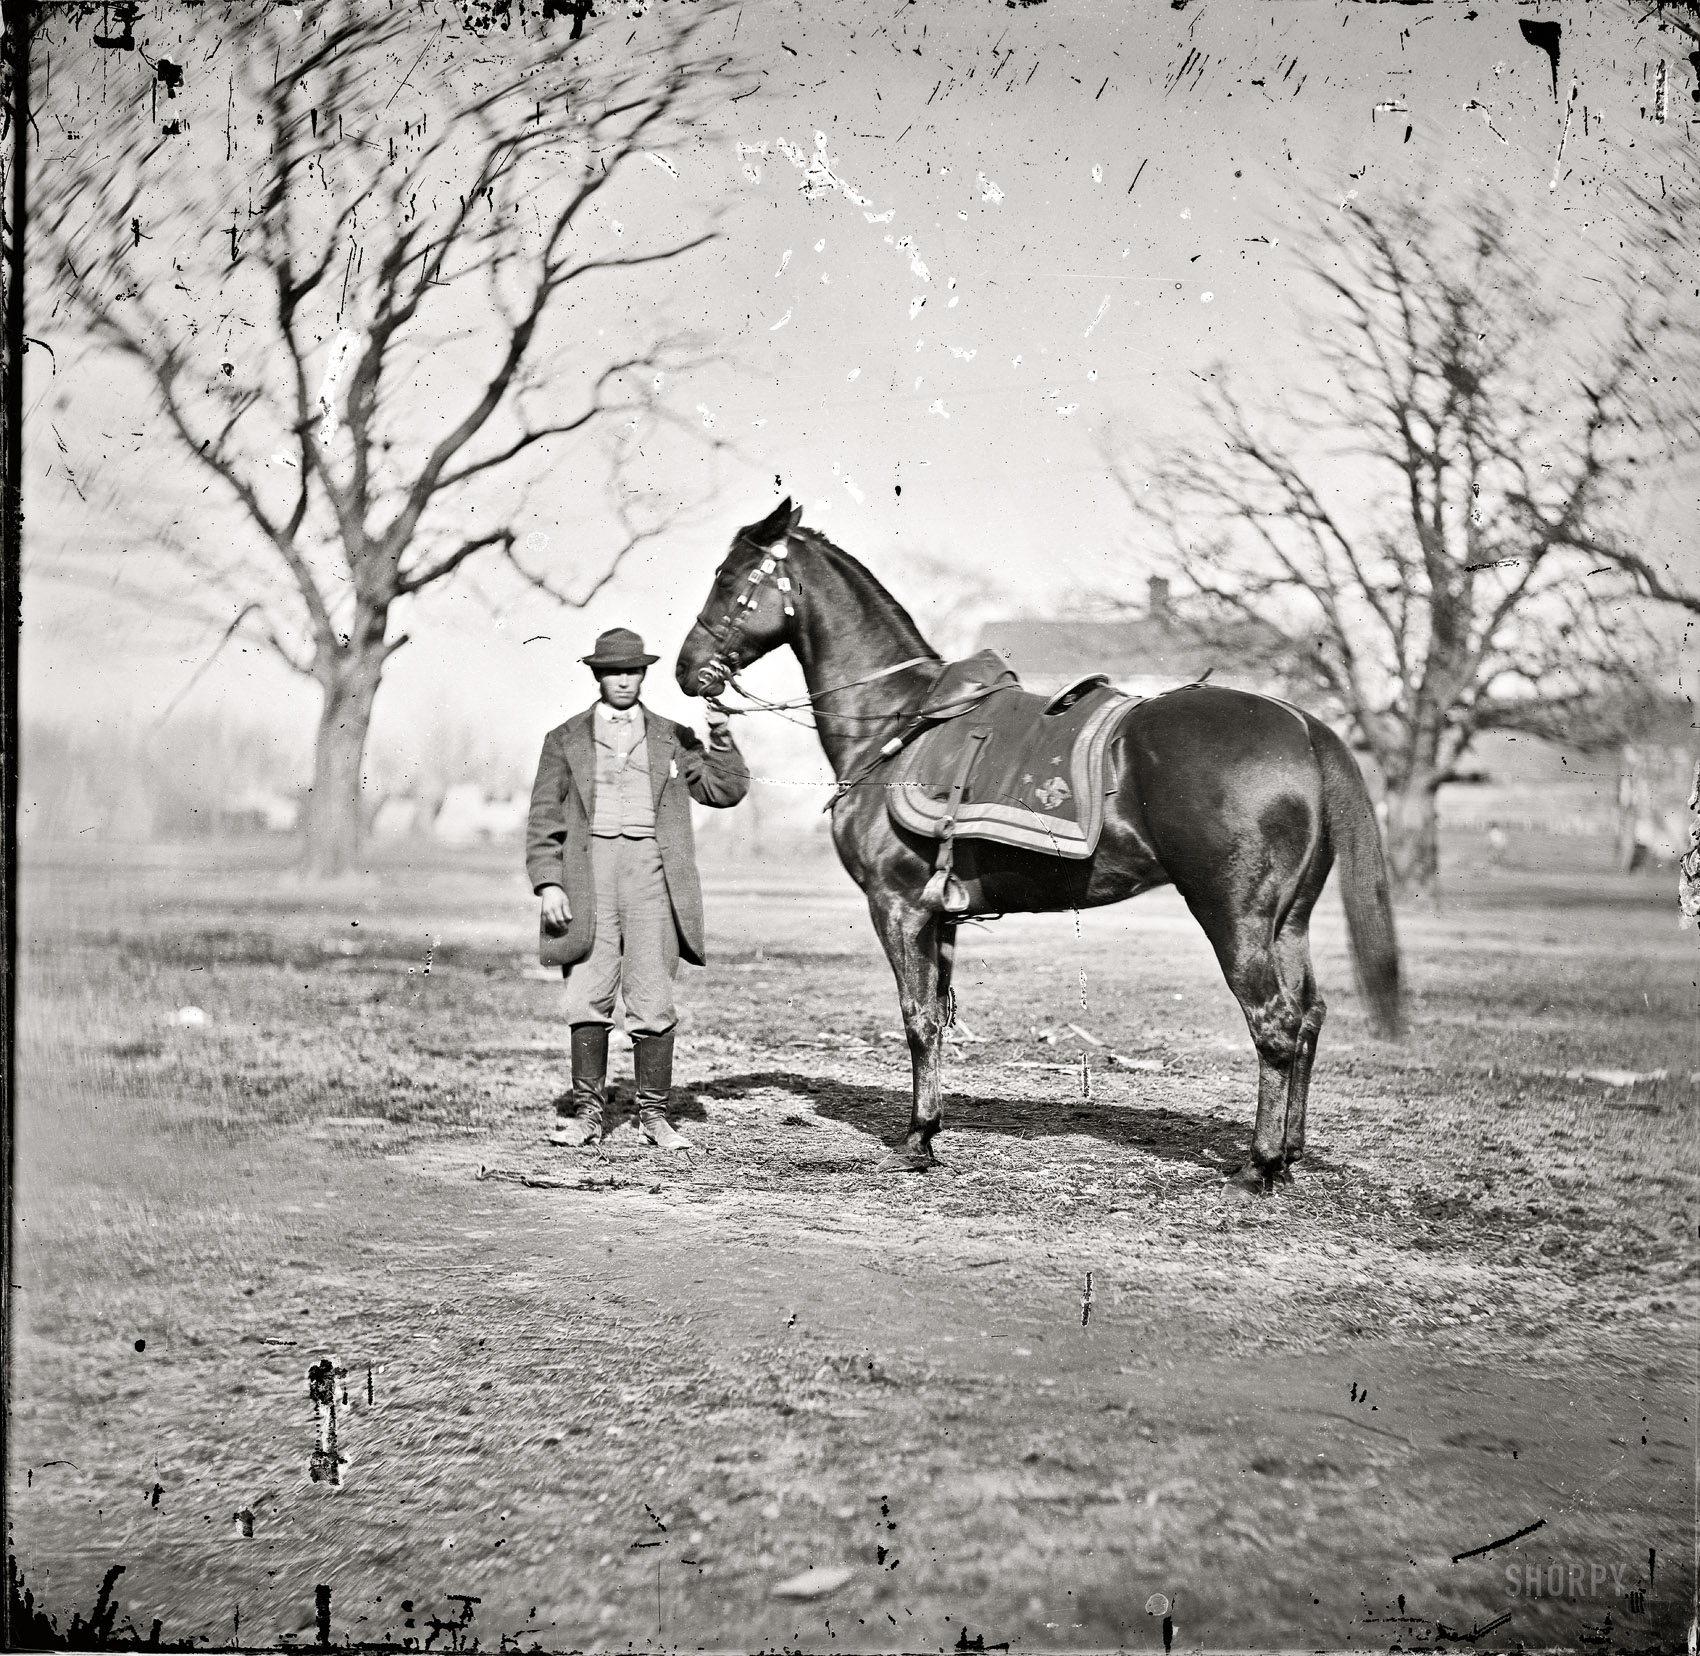 March 1865. "City Point, Virginia. General U.S. Grant's horse Cincinnati." Wet plate glass negative, left half of stereograph pair. View full size.